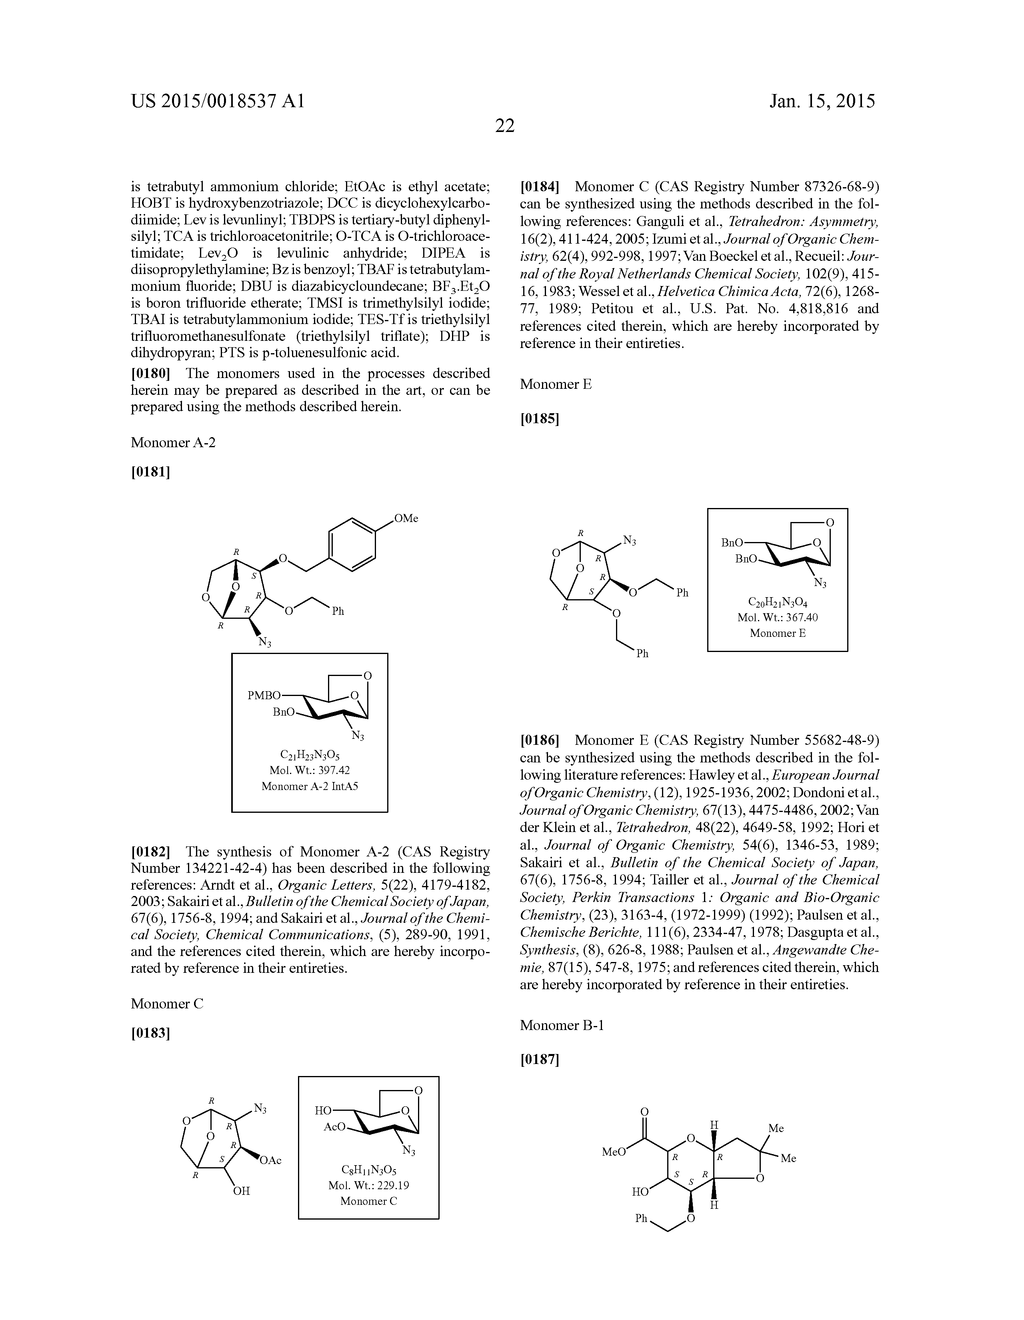 PROCESS FOR PERPARING FONDAPARINUX SODIUM AND INTERMEDIATES USEFUL IN THE     SYNTHESIS THEREOF - diagram, schematic, and image 34